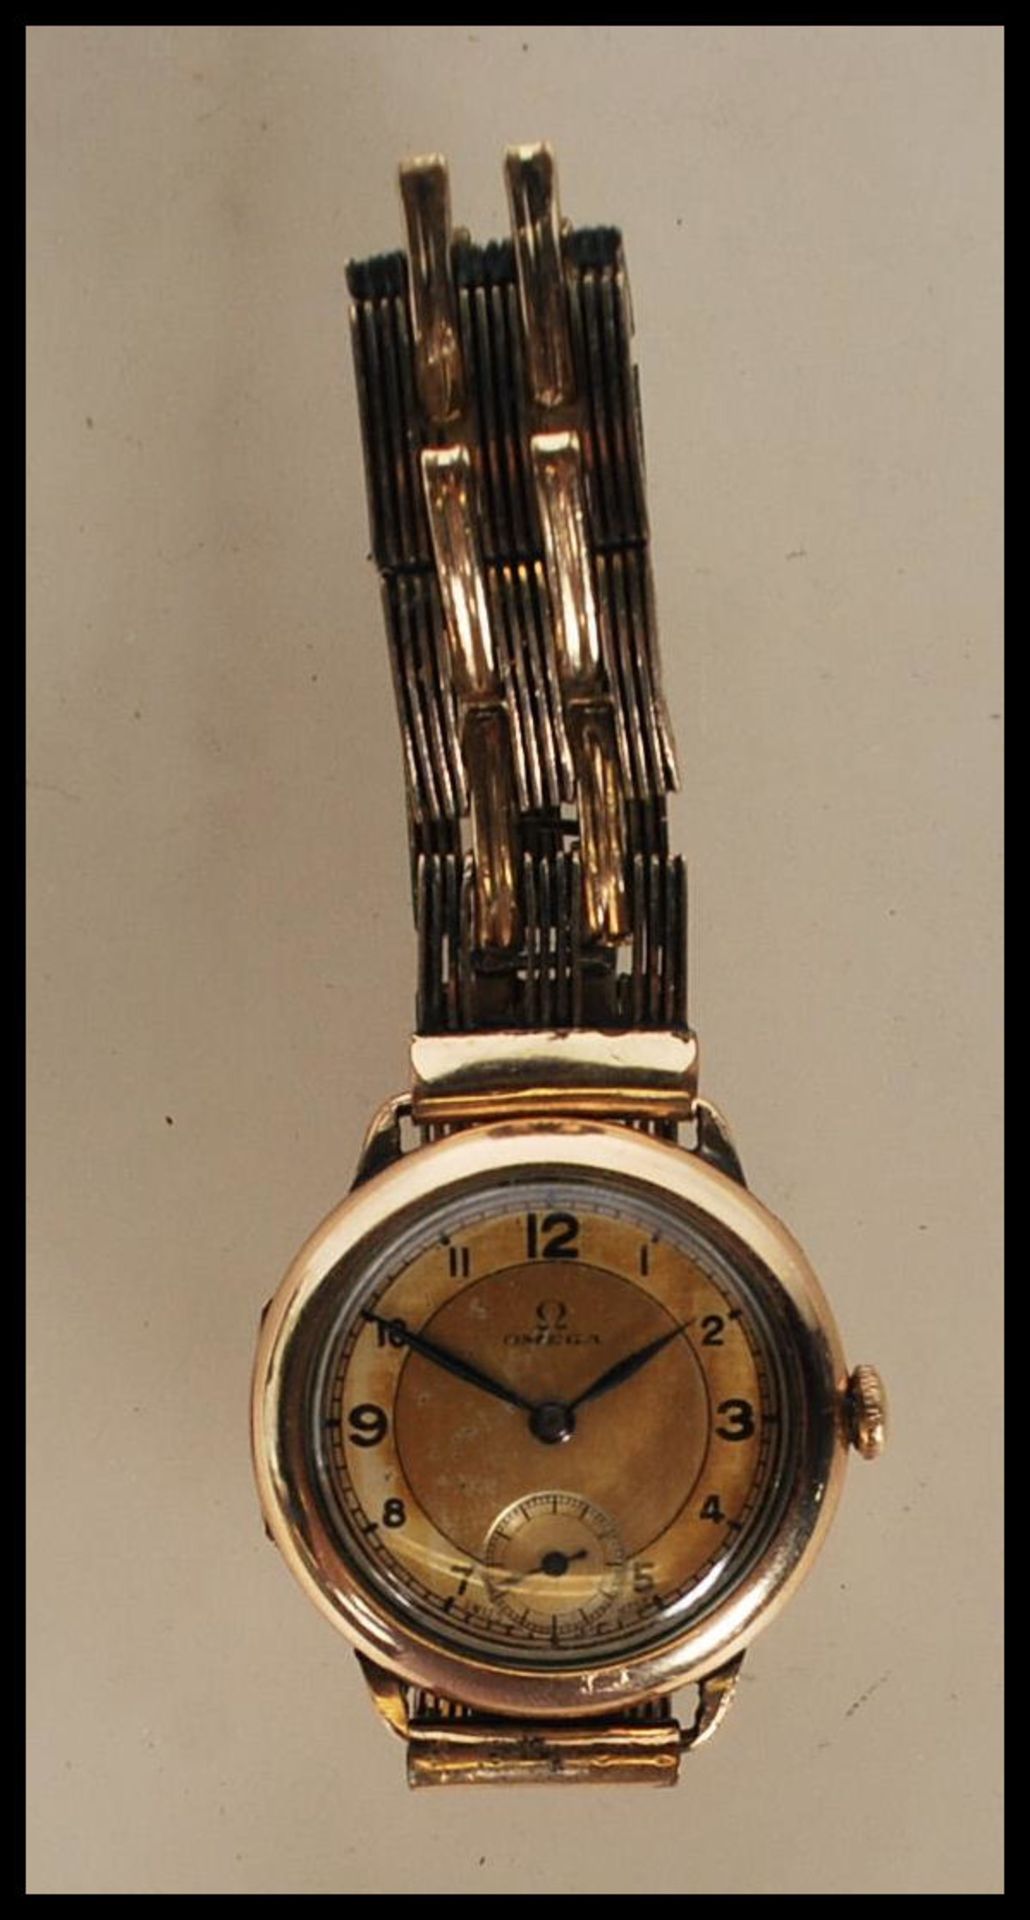 A vintage 1930's 15 jewels Omega gentleman's gold plated wrist watch having a round gilt face with